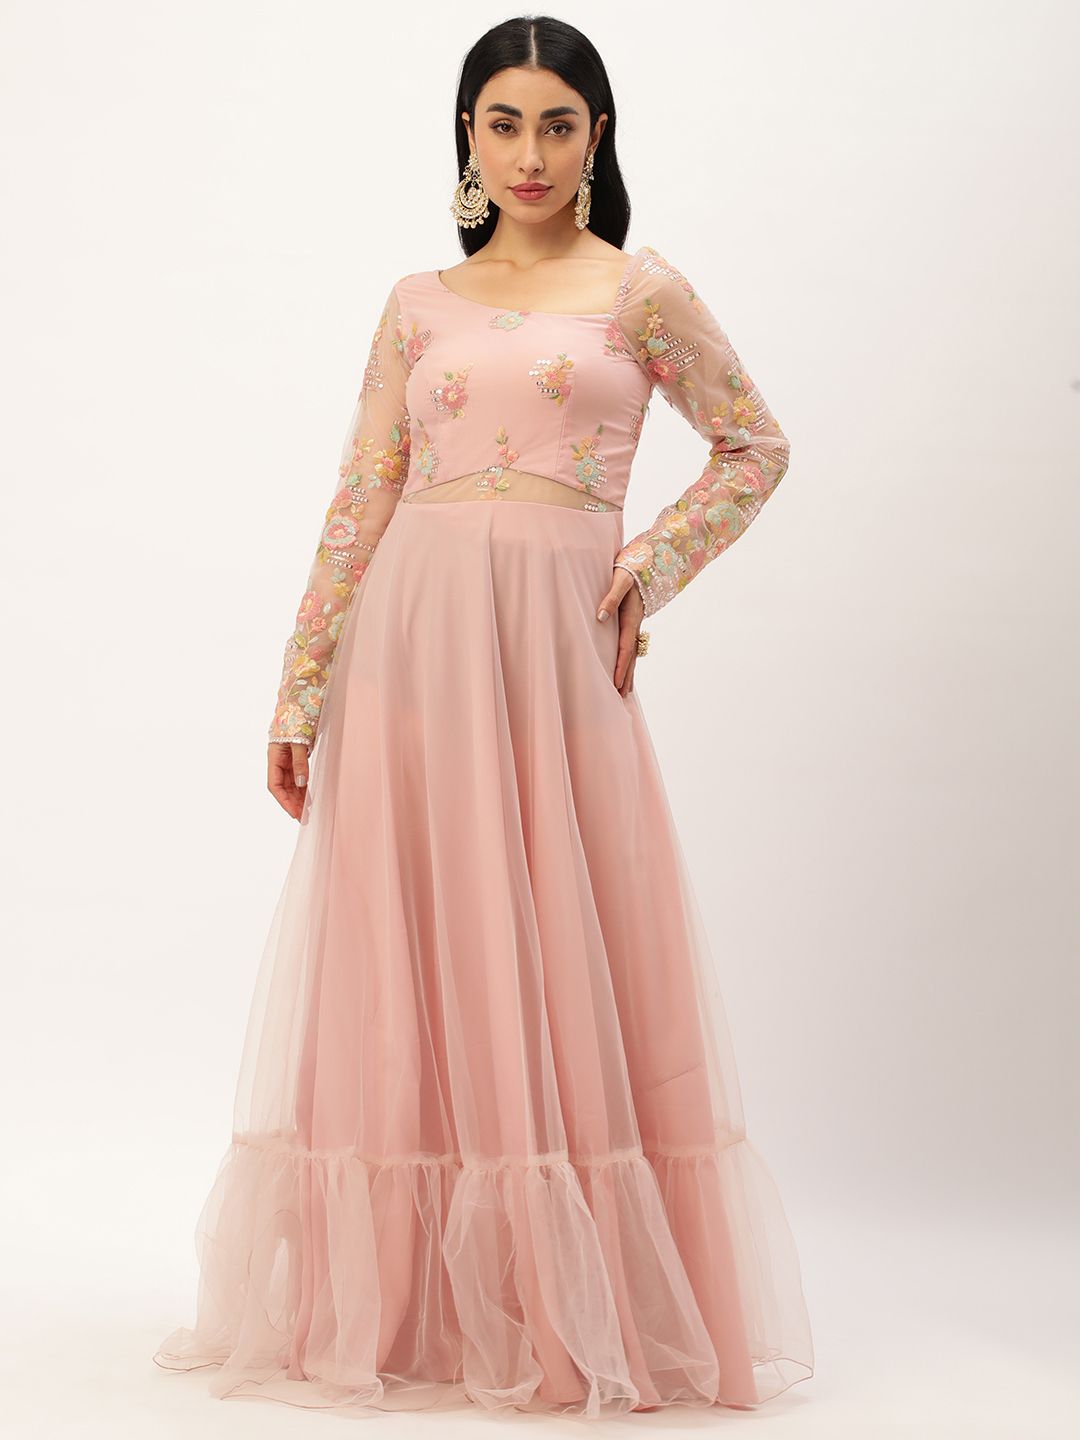 Ethnovog Floral Embroidered Net Maxi Dress Price in India